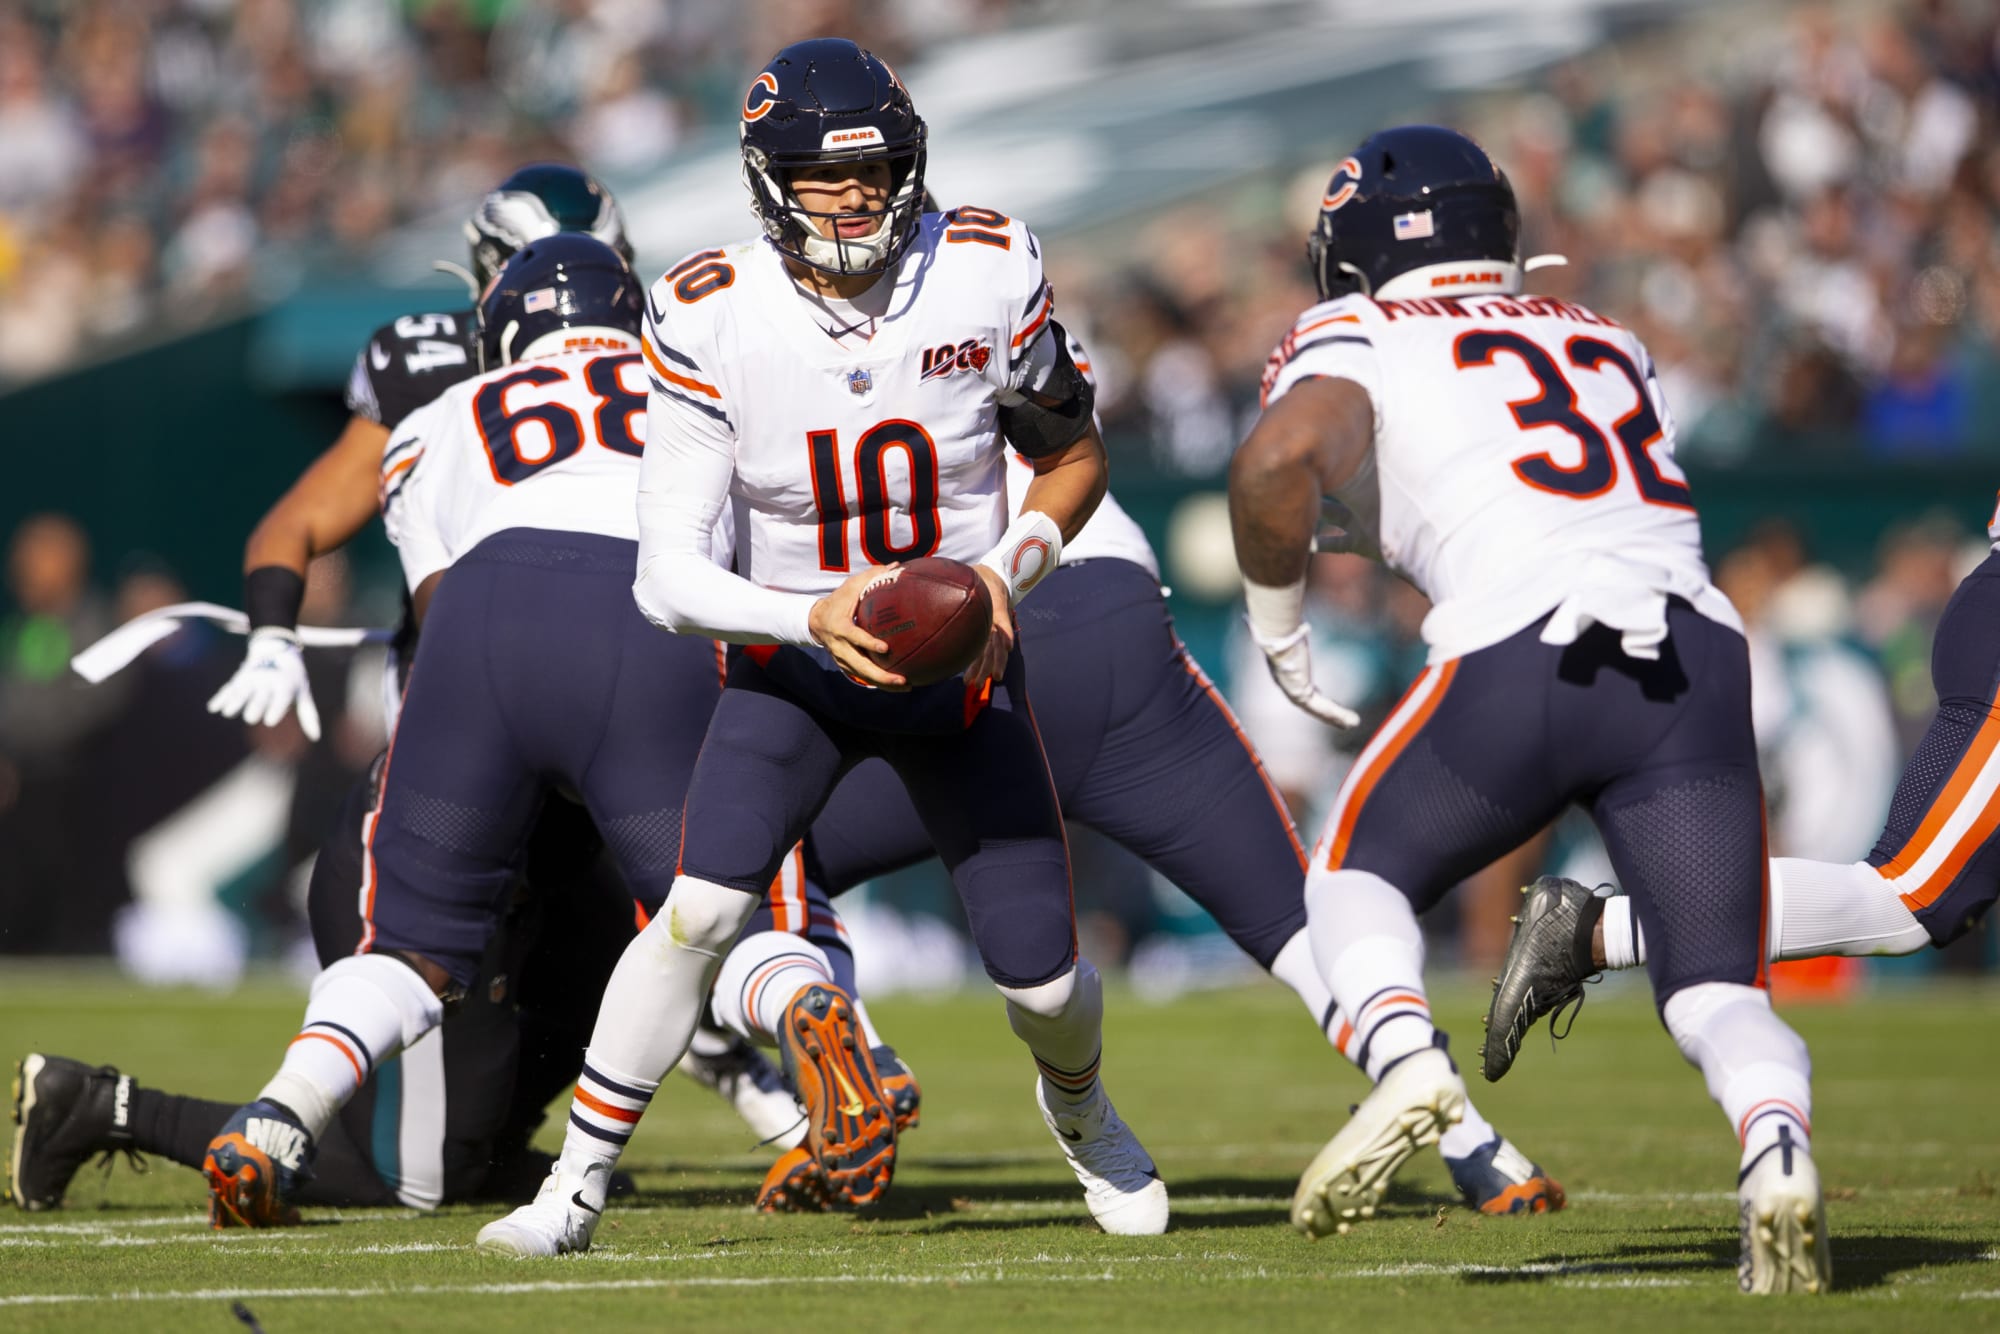 Chicago Bears: Of course there is no preseason in 2020